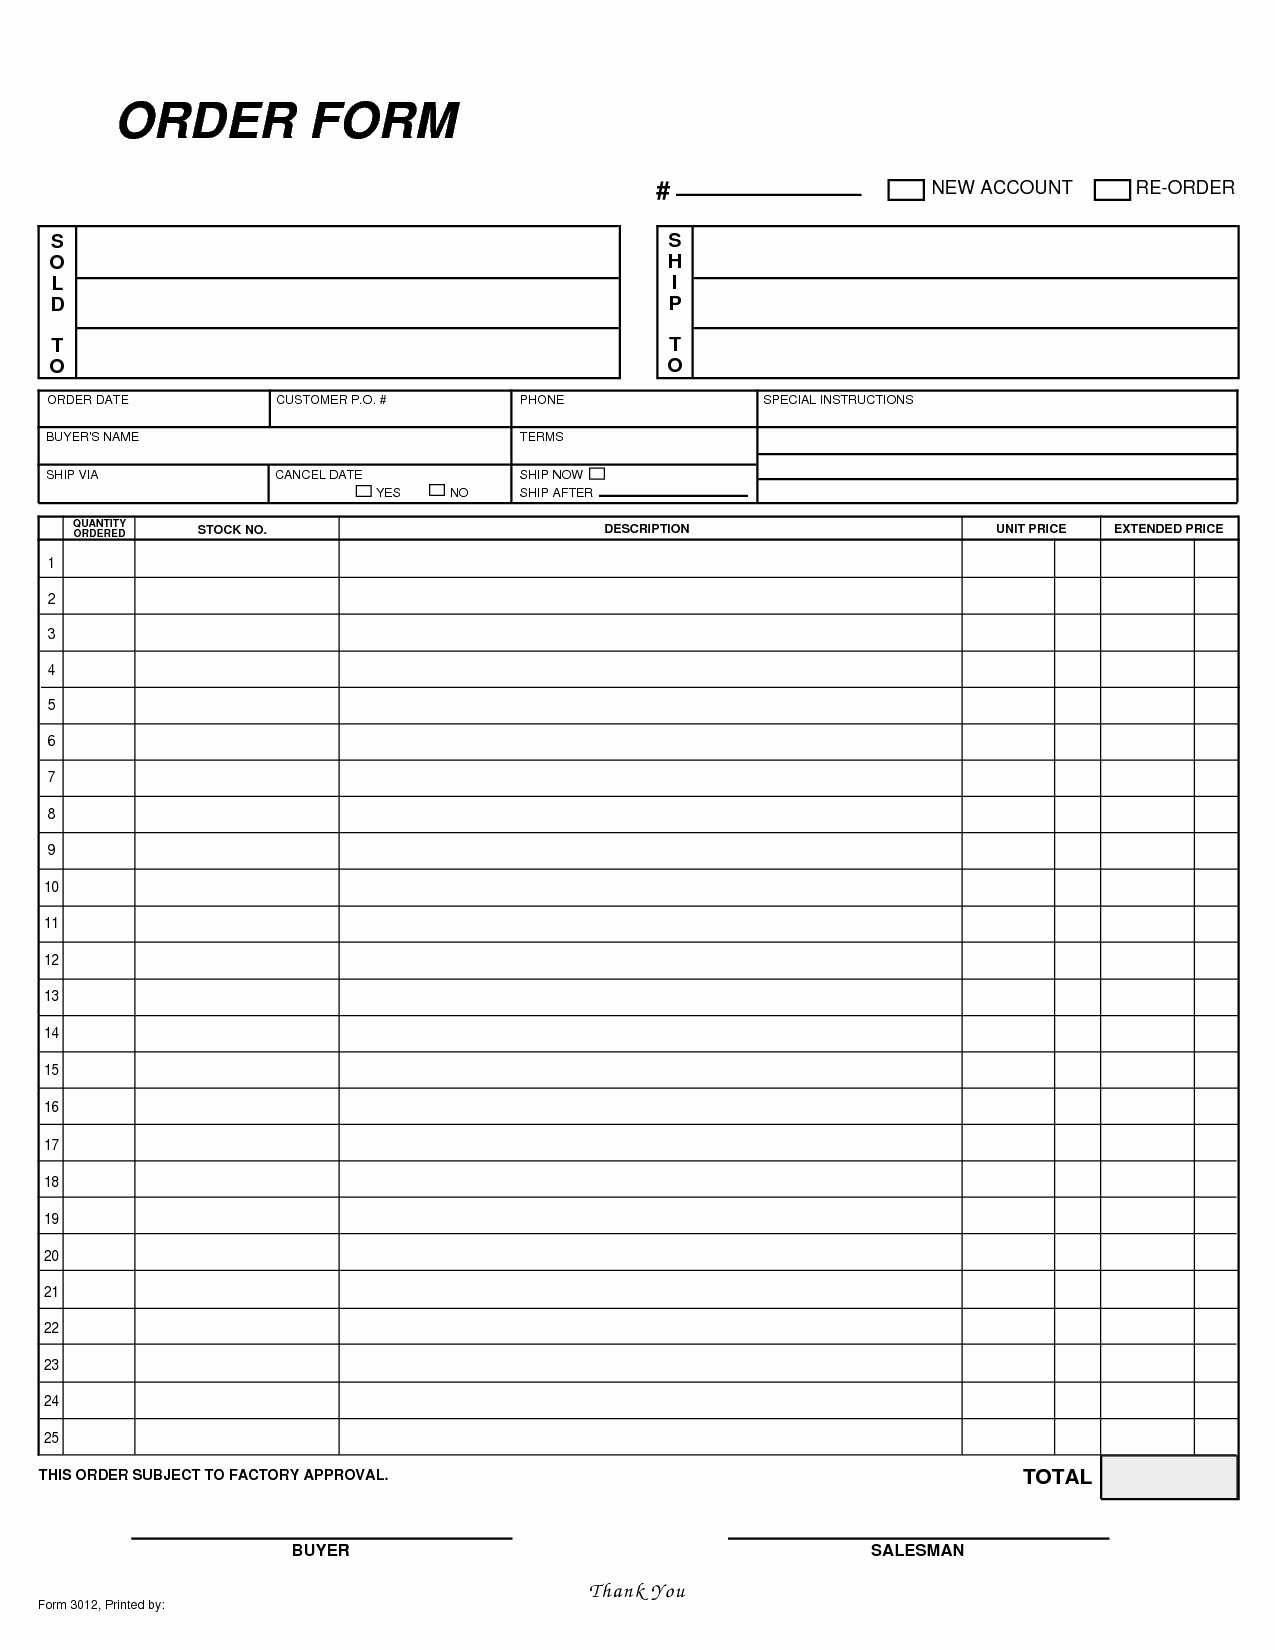 Sales order form Template Free Best Of 9 Best Of Free Printable Blank order forms Free